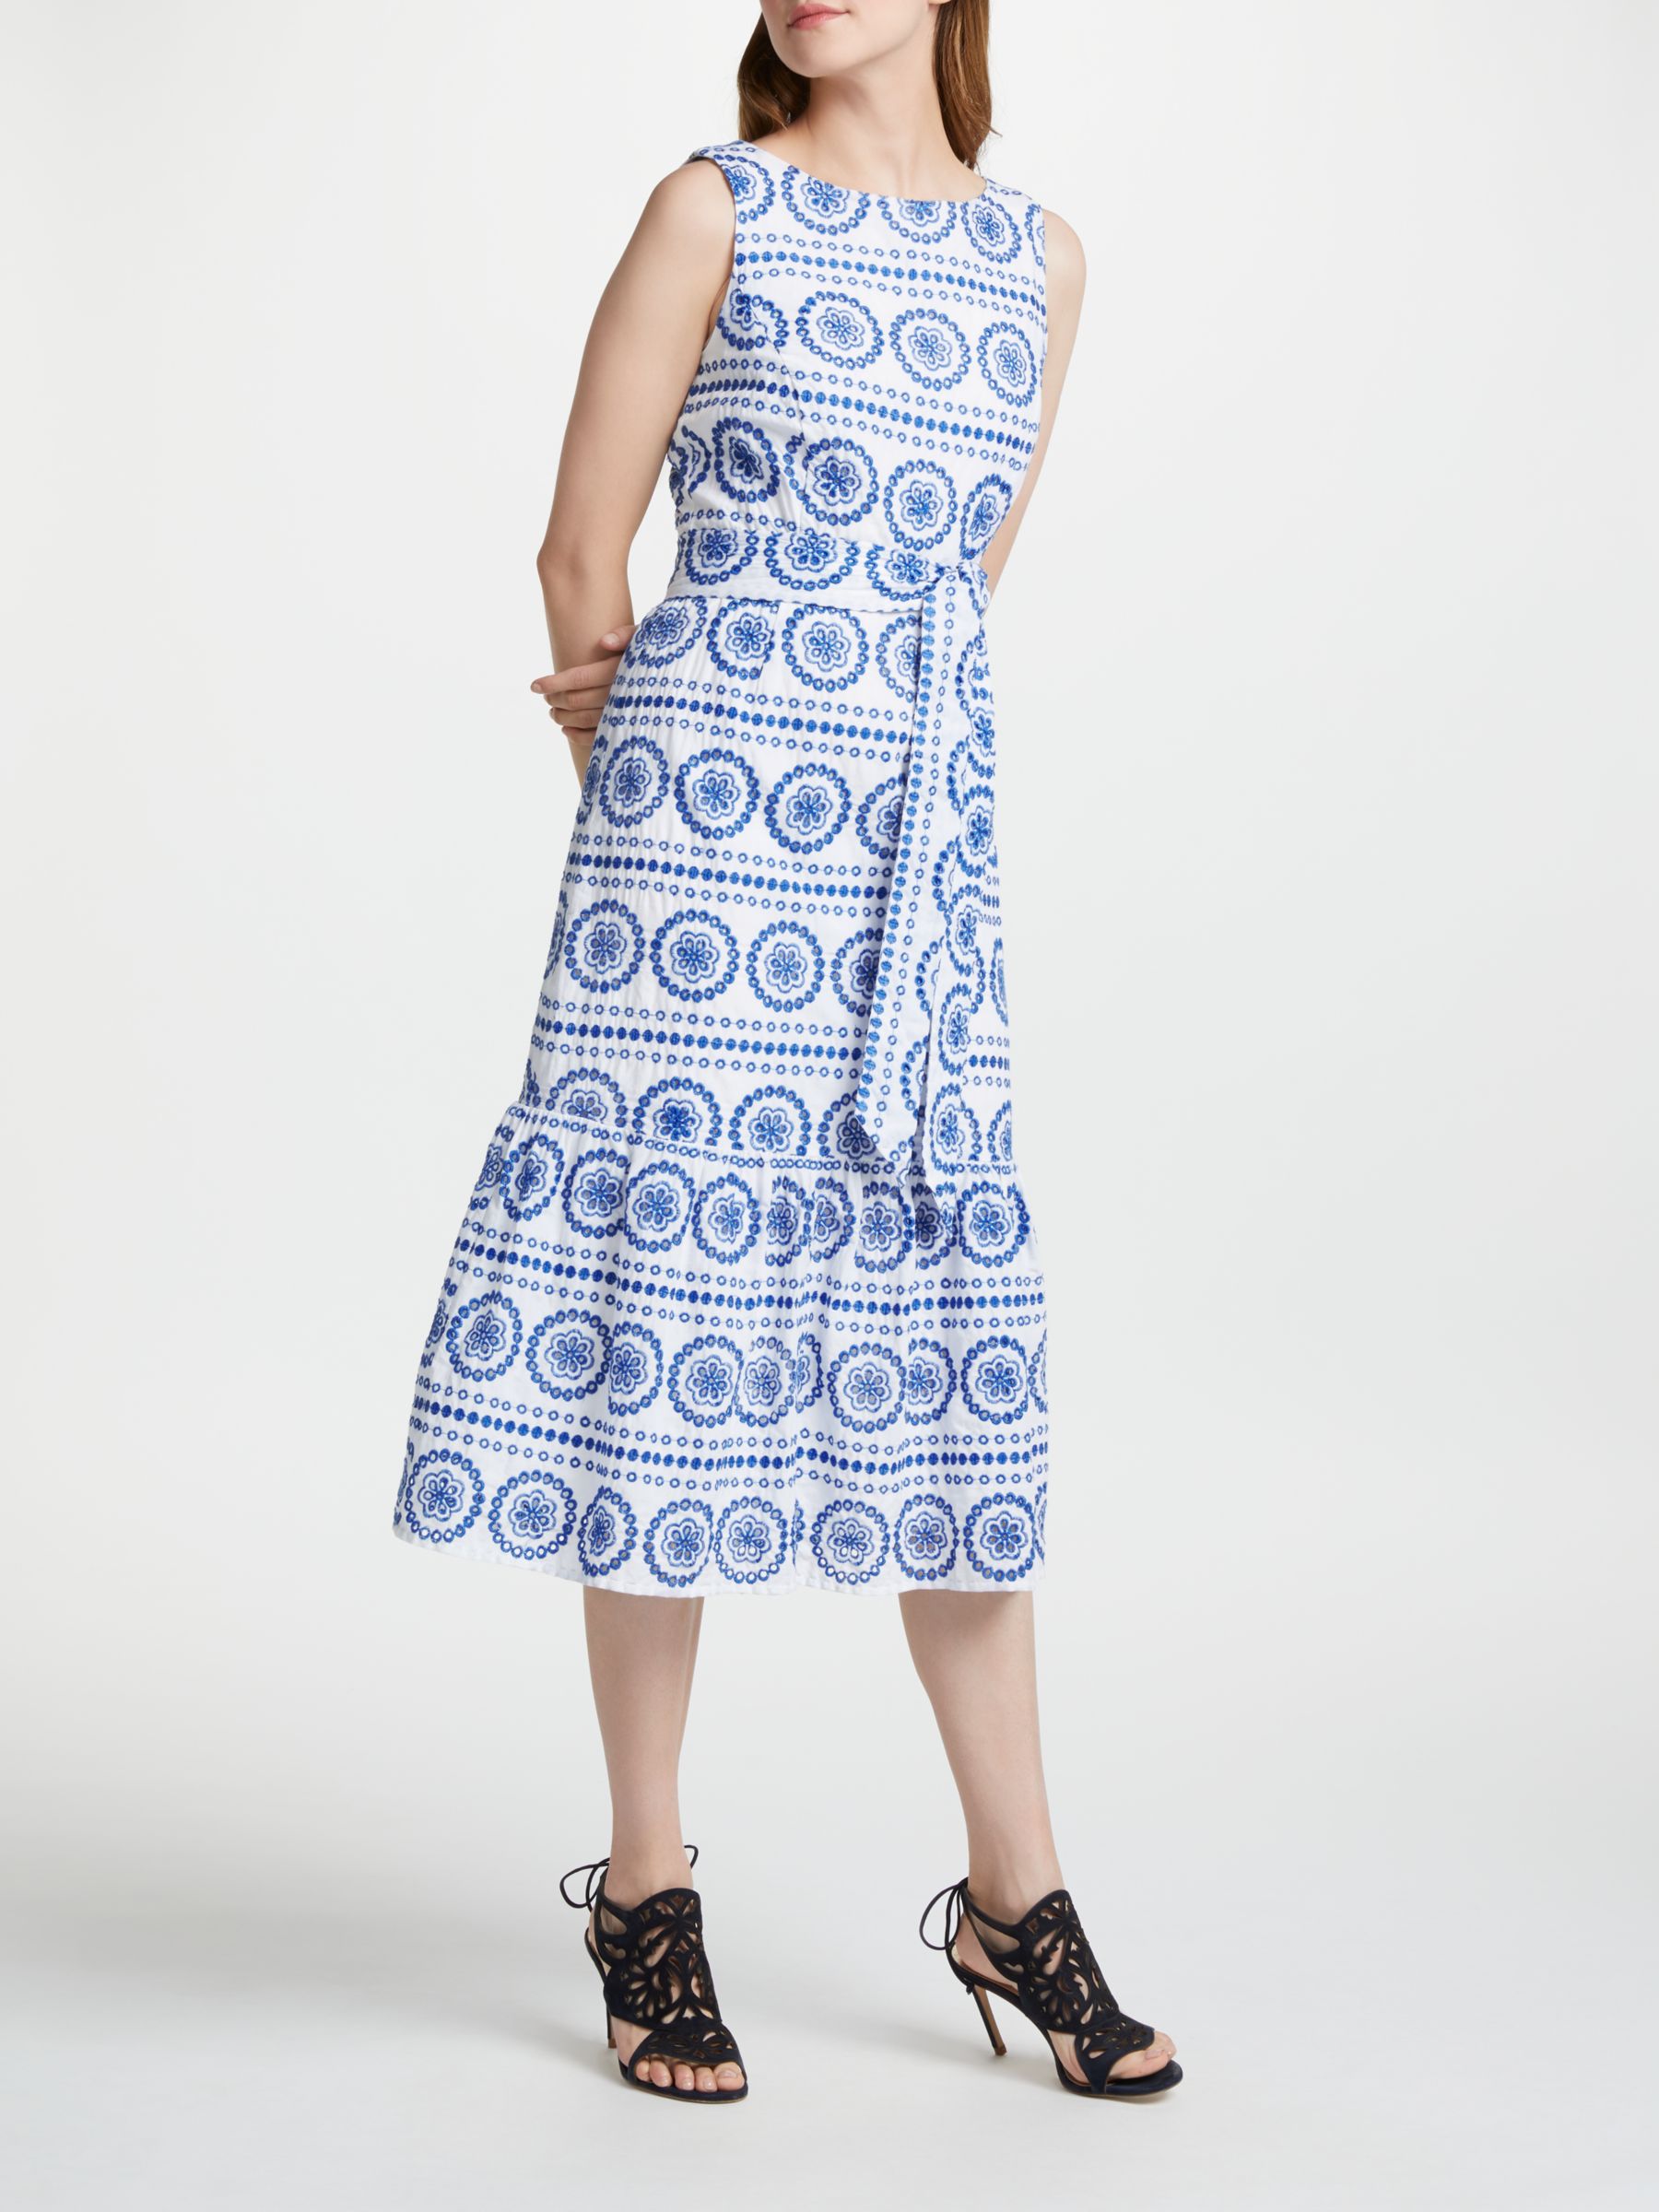 Boden Broderie Dress, White China Blue Embroidery at John Lewis & Partners